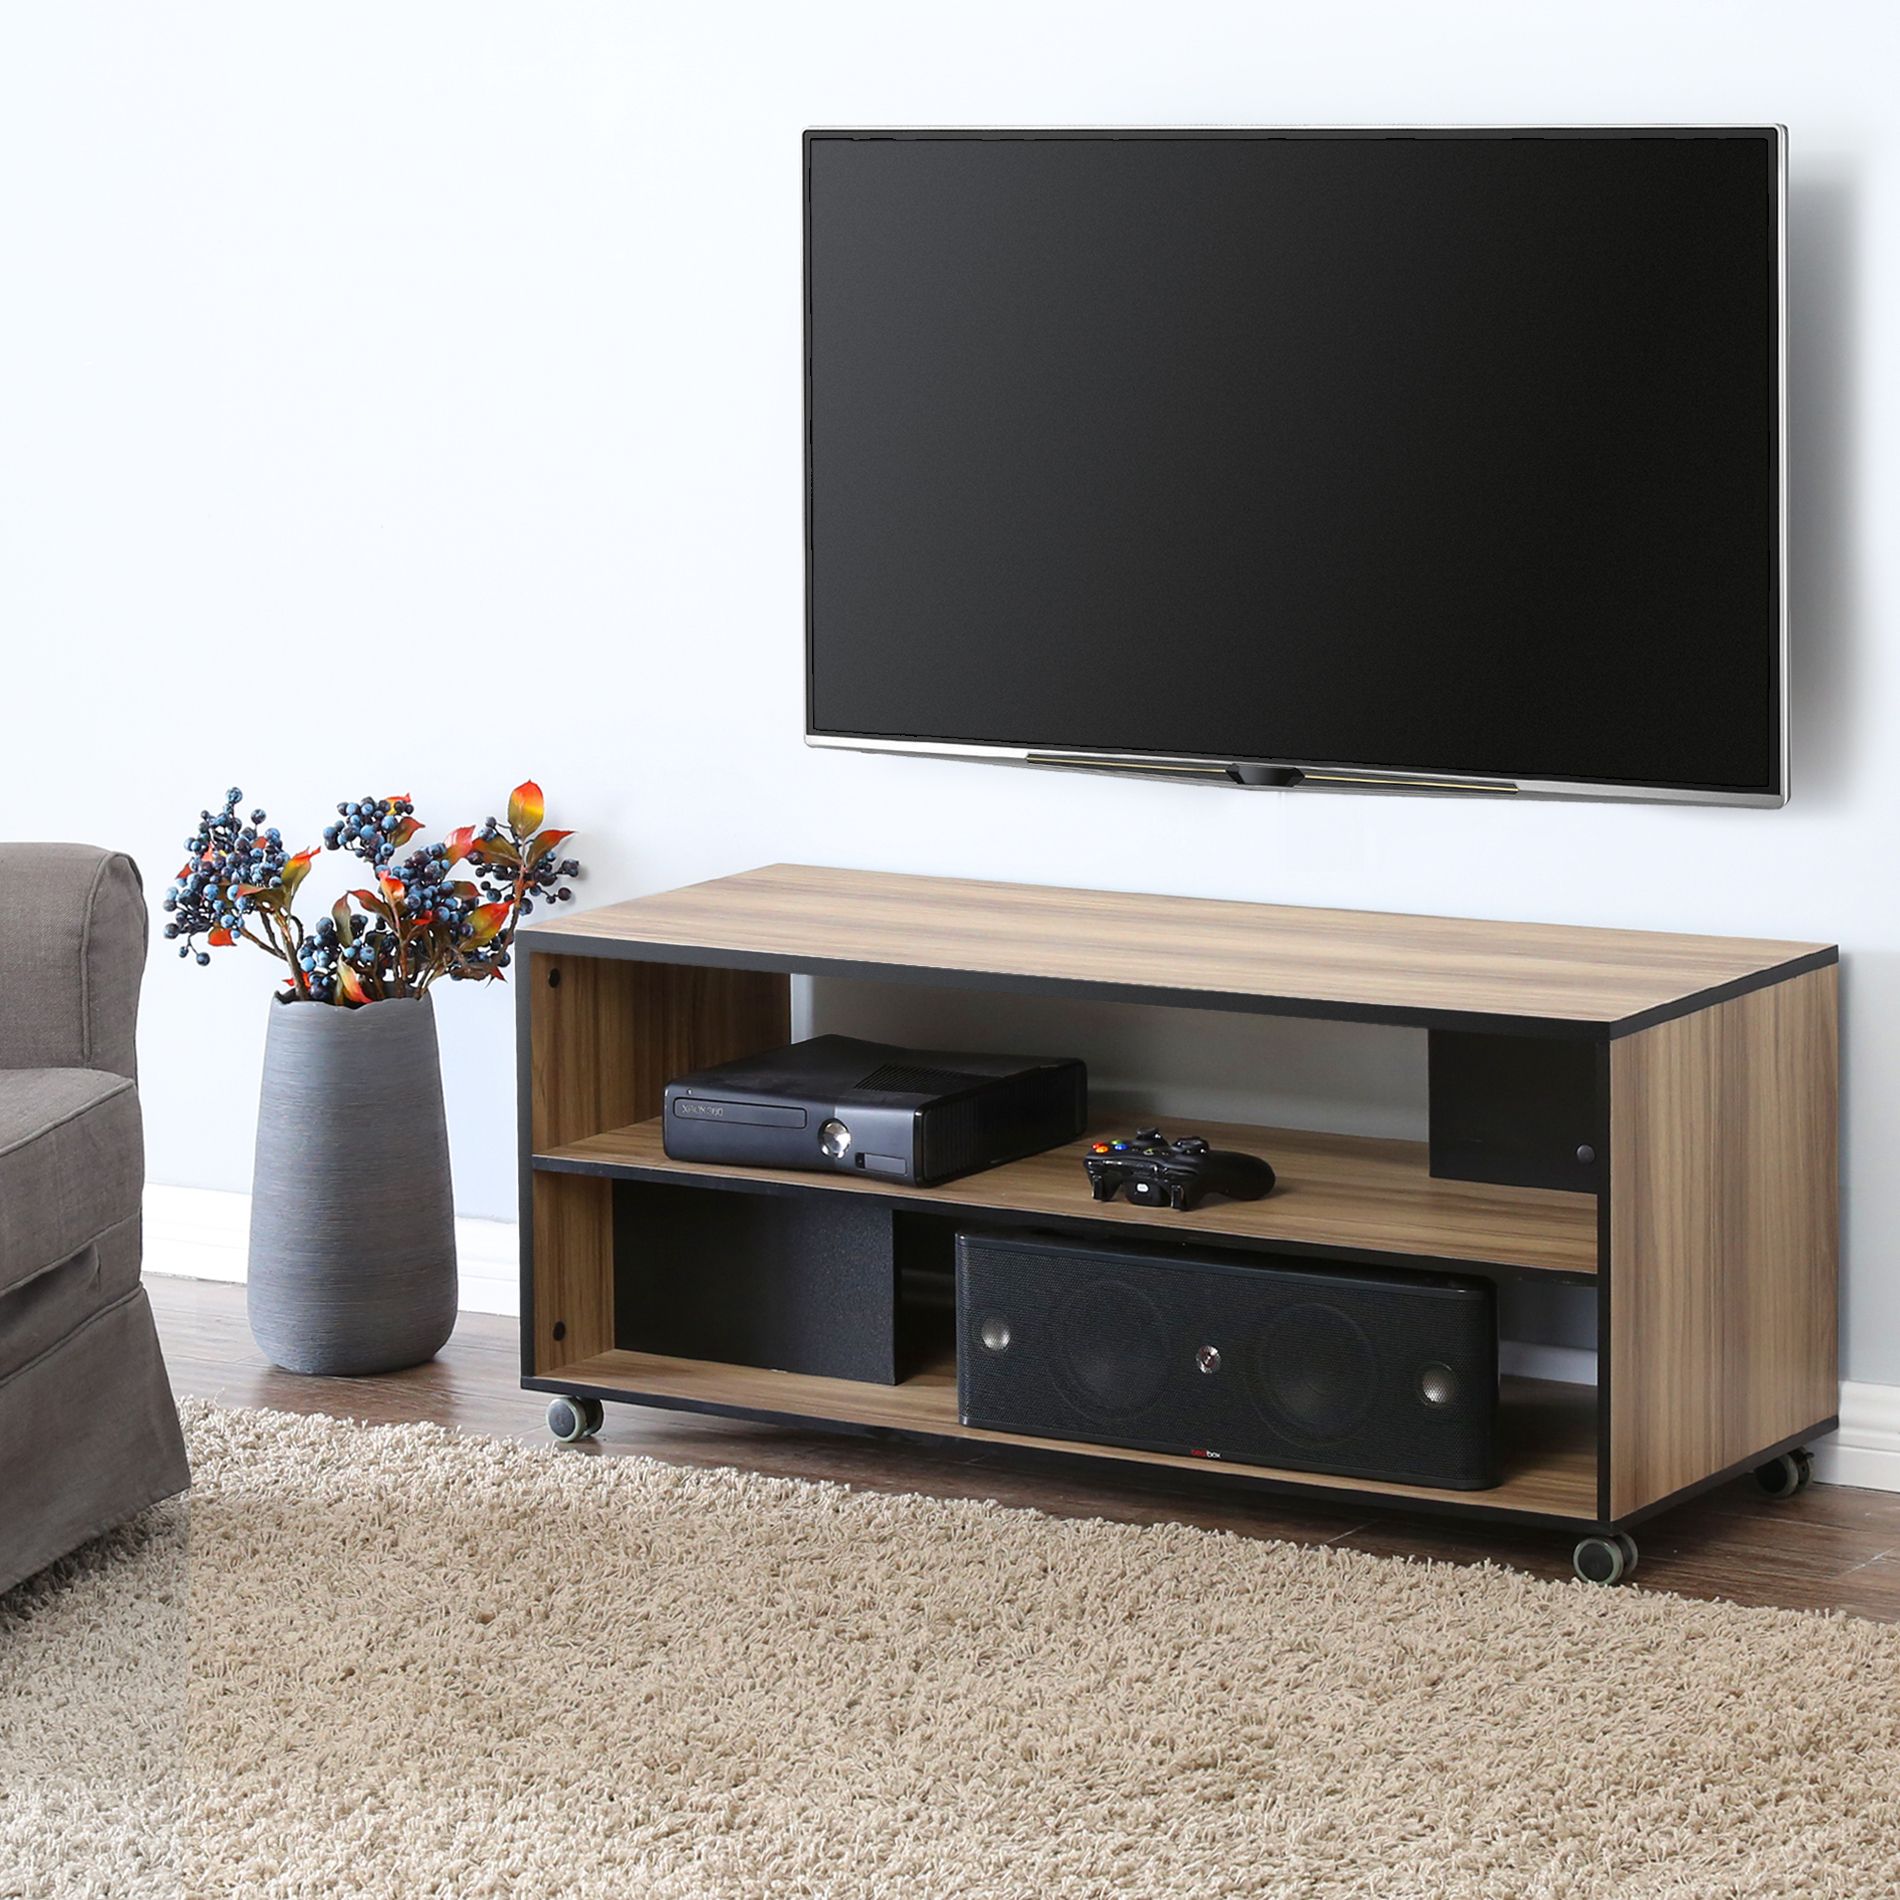 Fitueyes Wood Tv Stand Storage Console With Wheels For 23 For Wooden Tv Stands (View 14 of 15)